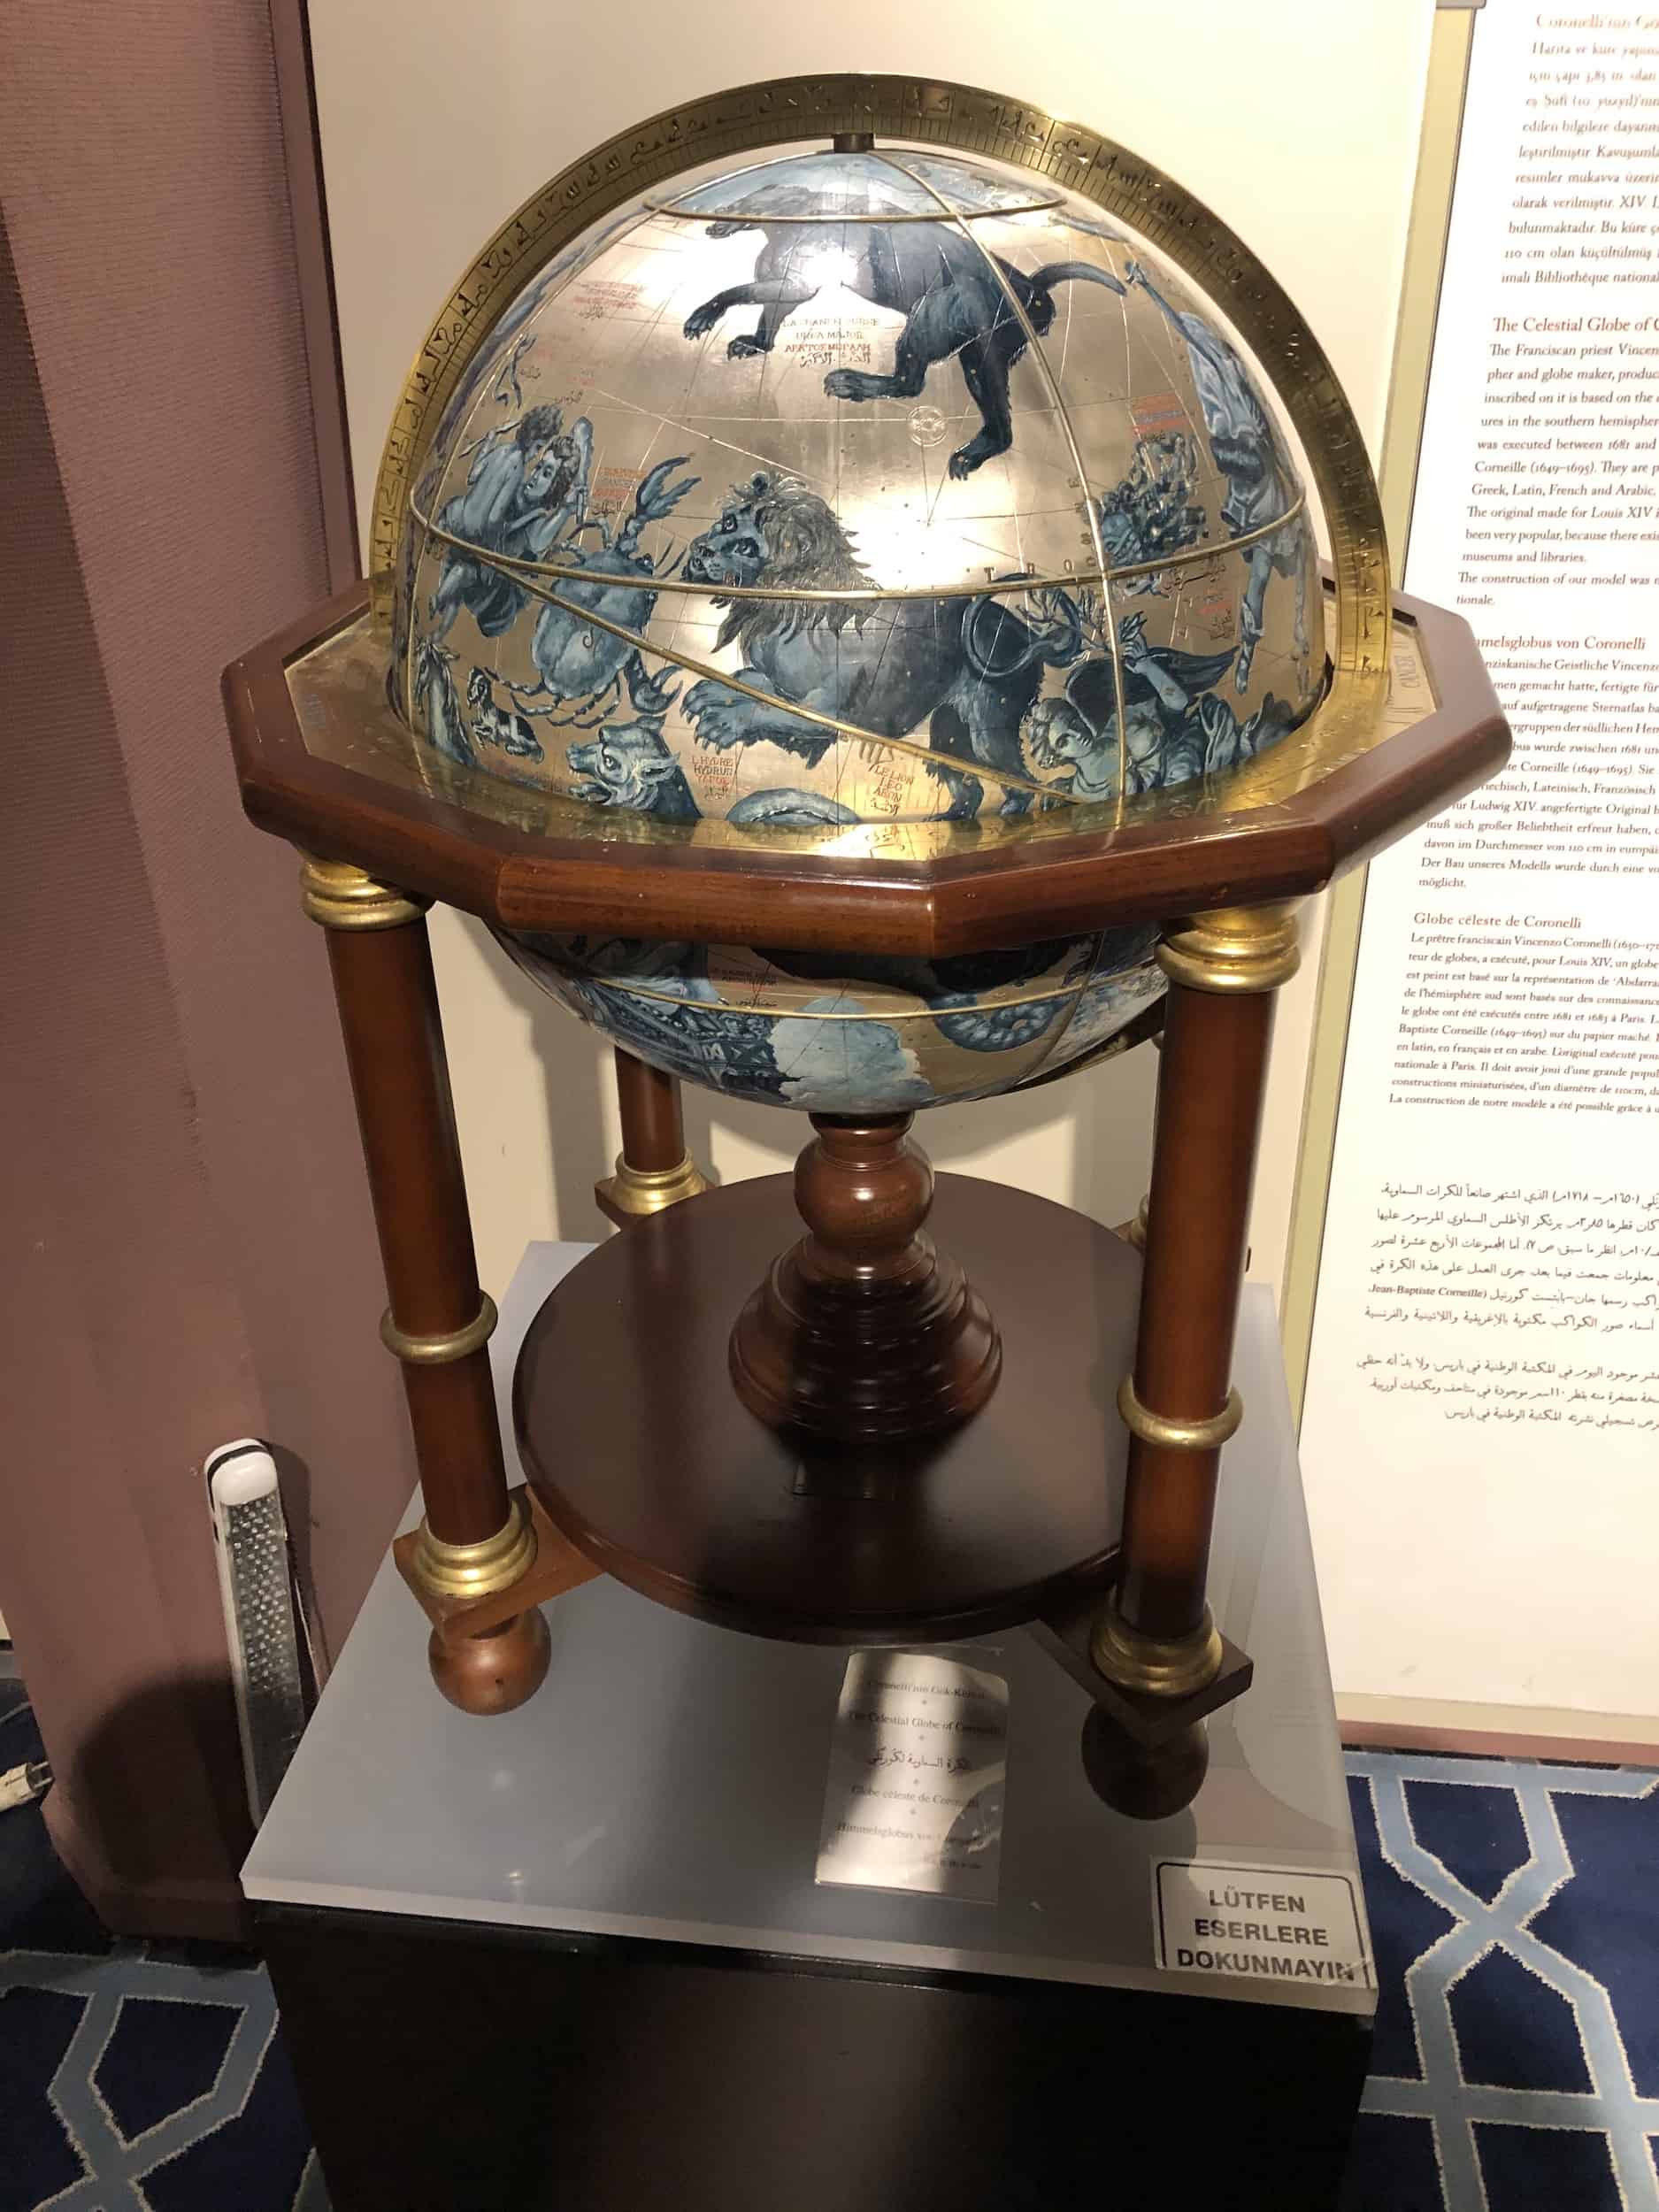 Celestial Globe of Coronelli at the Museum of the History of Science and Technology in Islam in Istanbul, Turkey